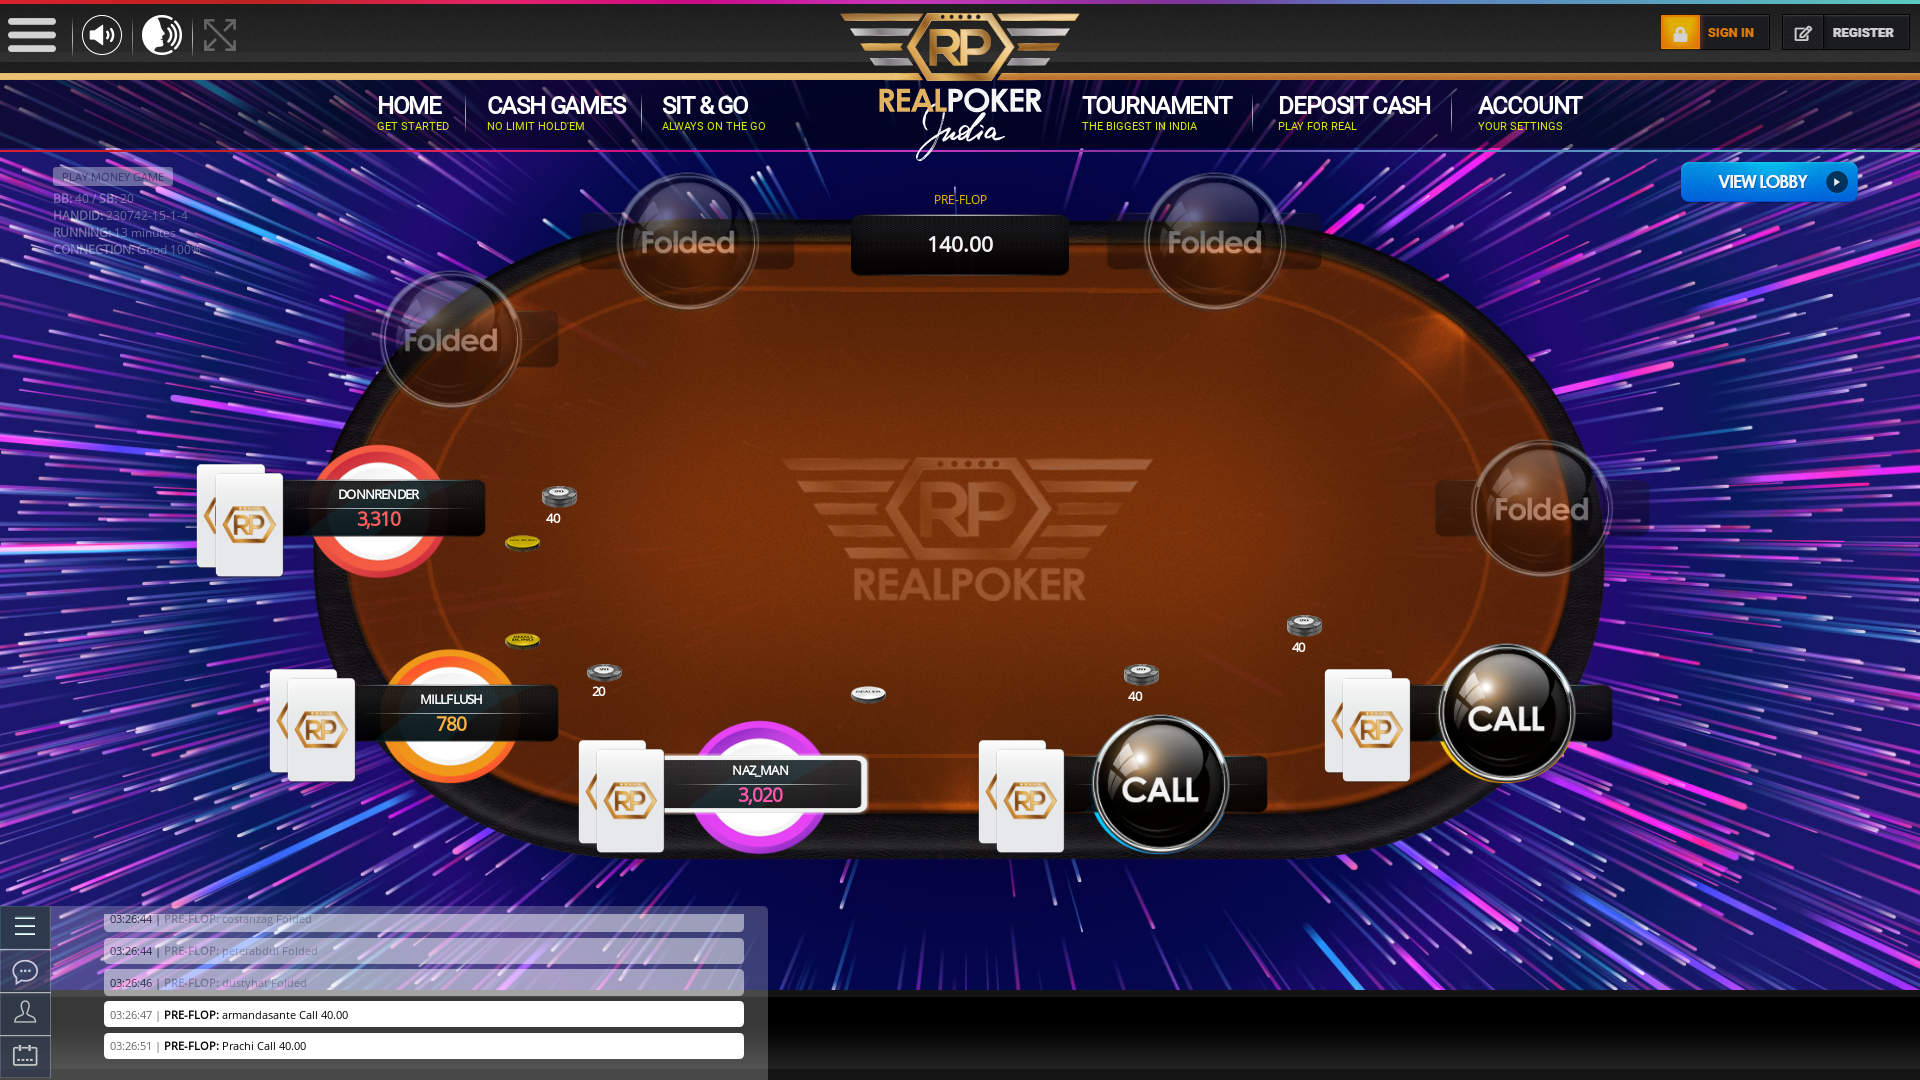 Online poker on a 10 player table in the 12th minute match up